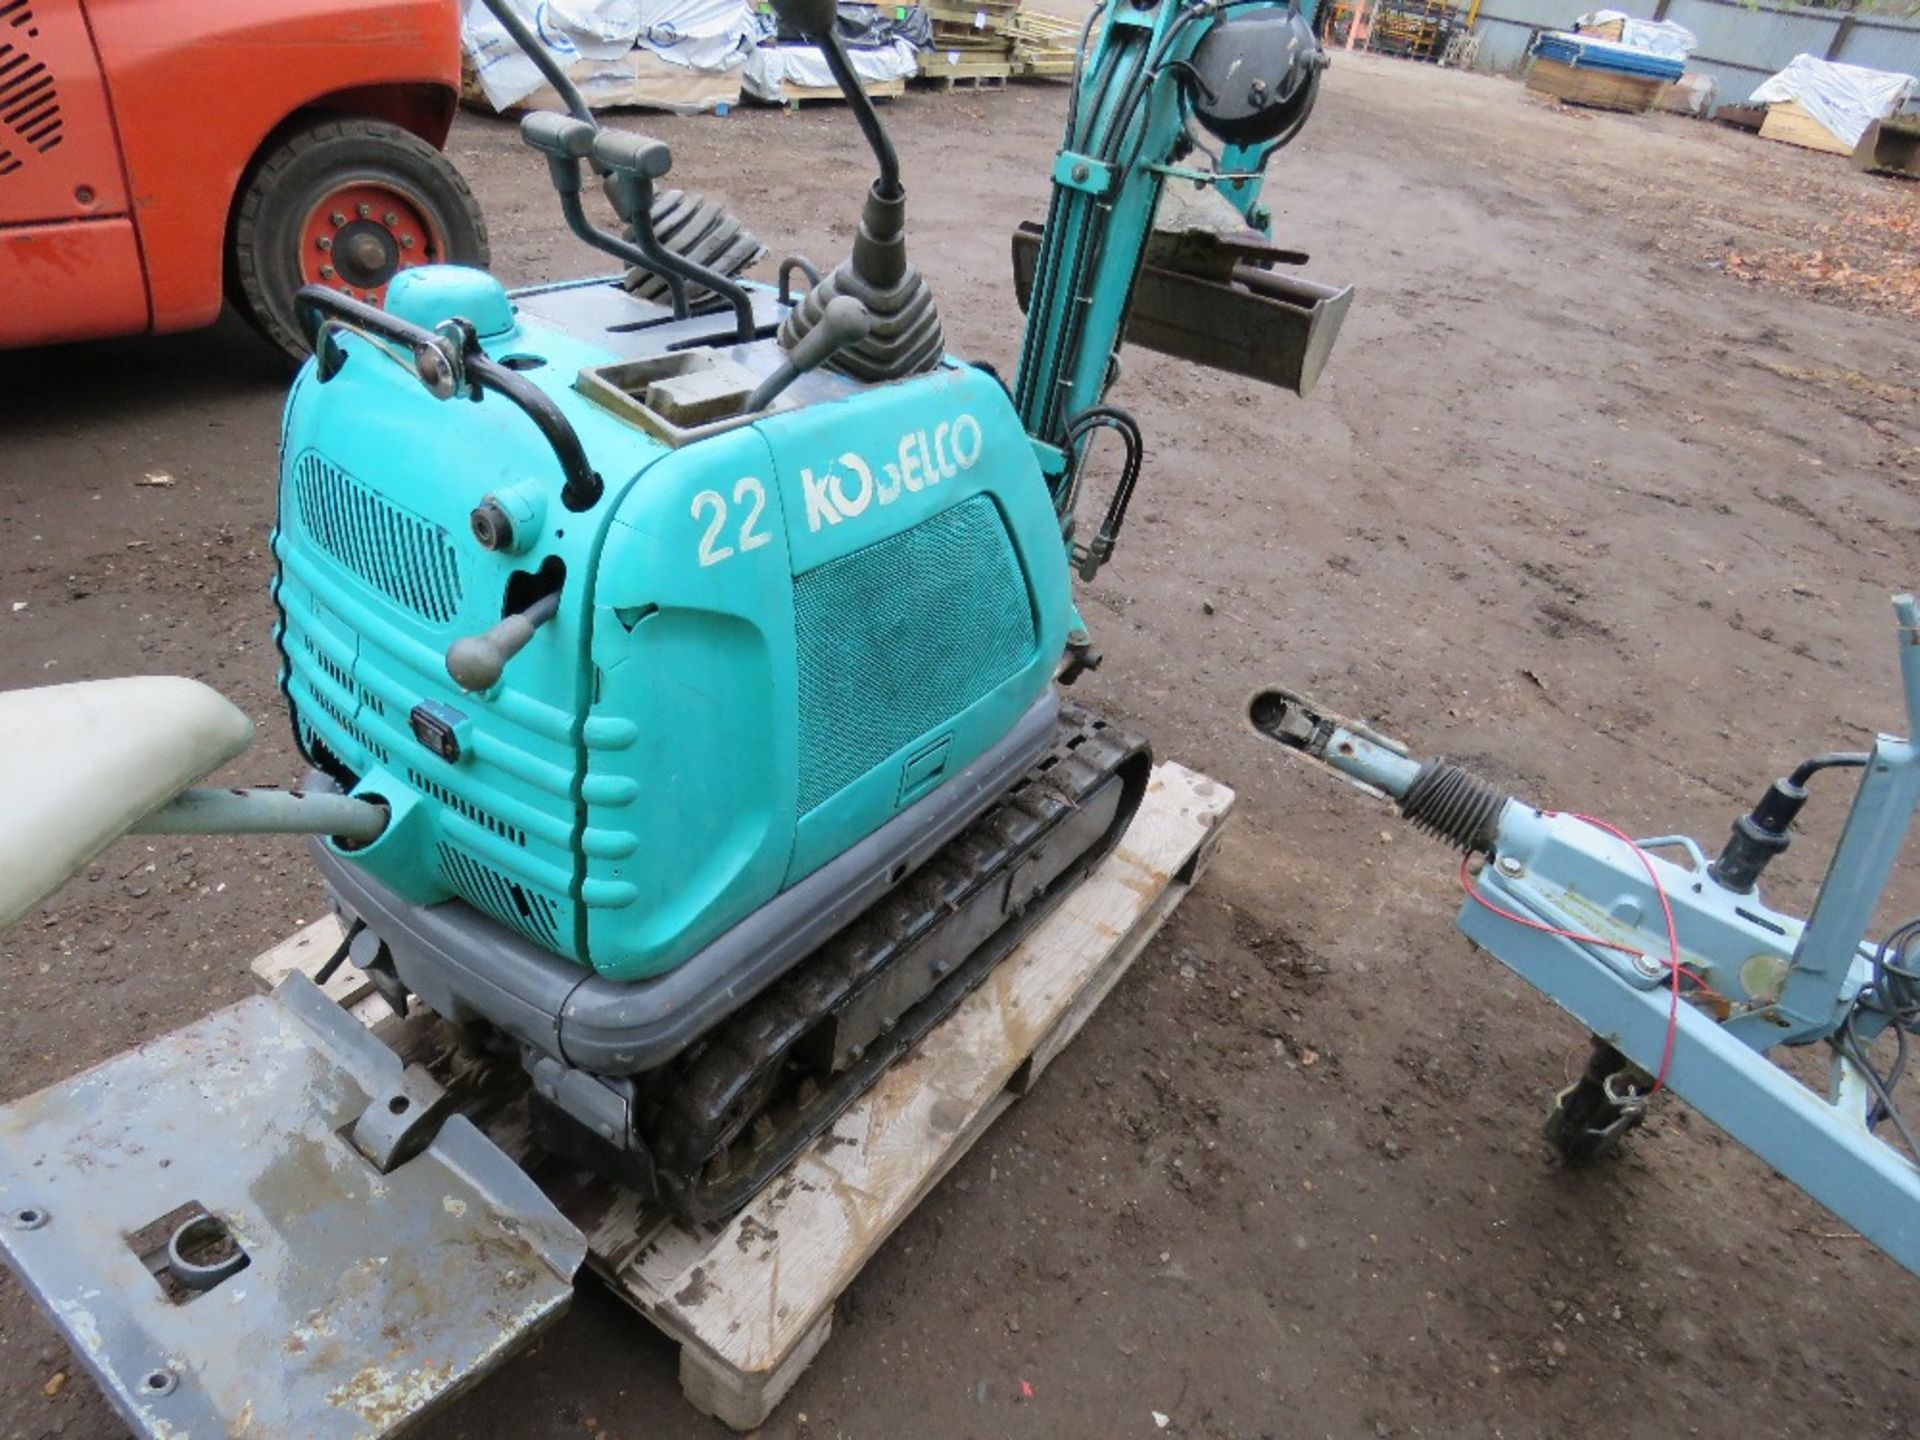 KOBELCO 22 MICRO EXCAVATOR WITH 2 X BUCKETS. PETROL ENGINED, 1049 REC HOURS. SN:FS-01494. THIS LOT I - Image 4 of 8